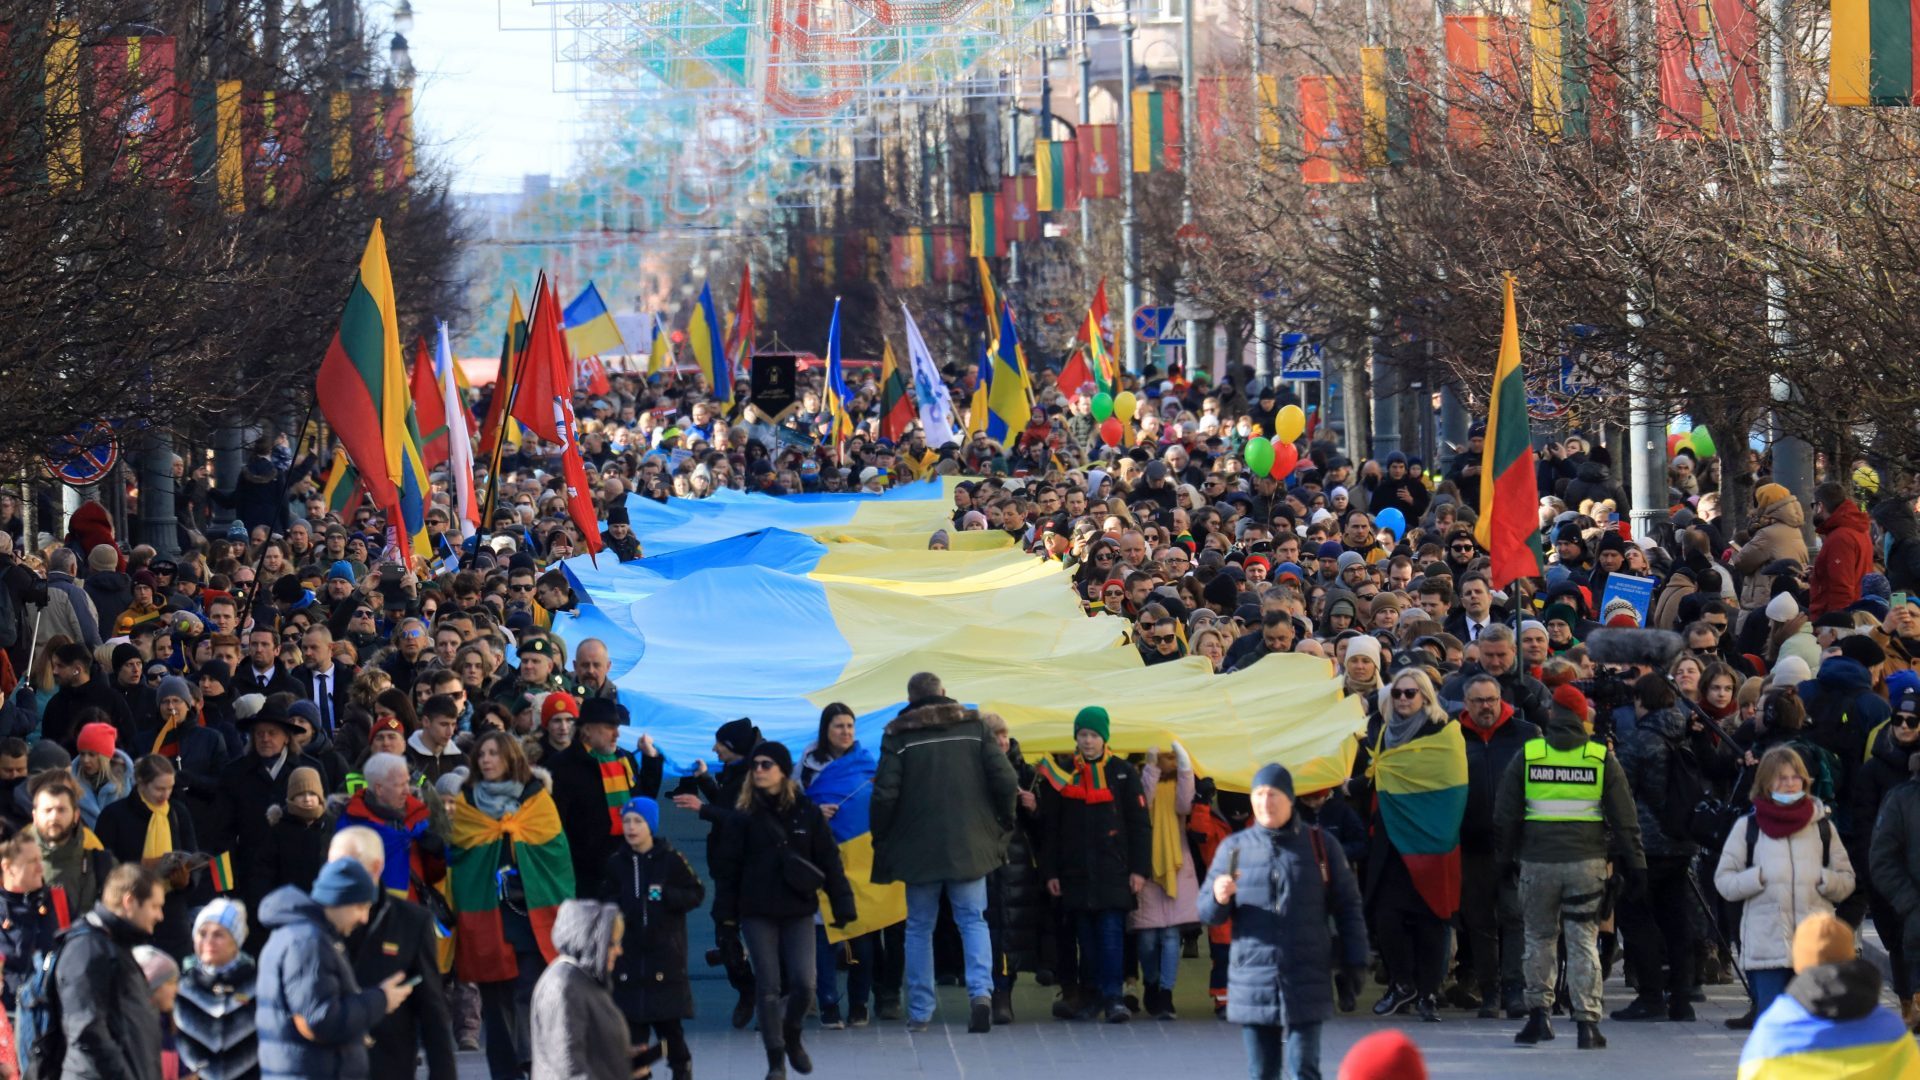 People walk with a giant many meter-long Ukrainian flag to protest against the Russian invasion of Ukraine during a celebration of Lithuania's independence in Vilnius, Lithuania. Photo: PETRAS MALUKAS/AFP via Getty Images